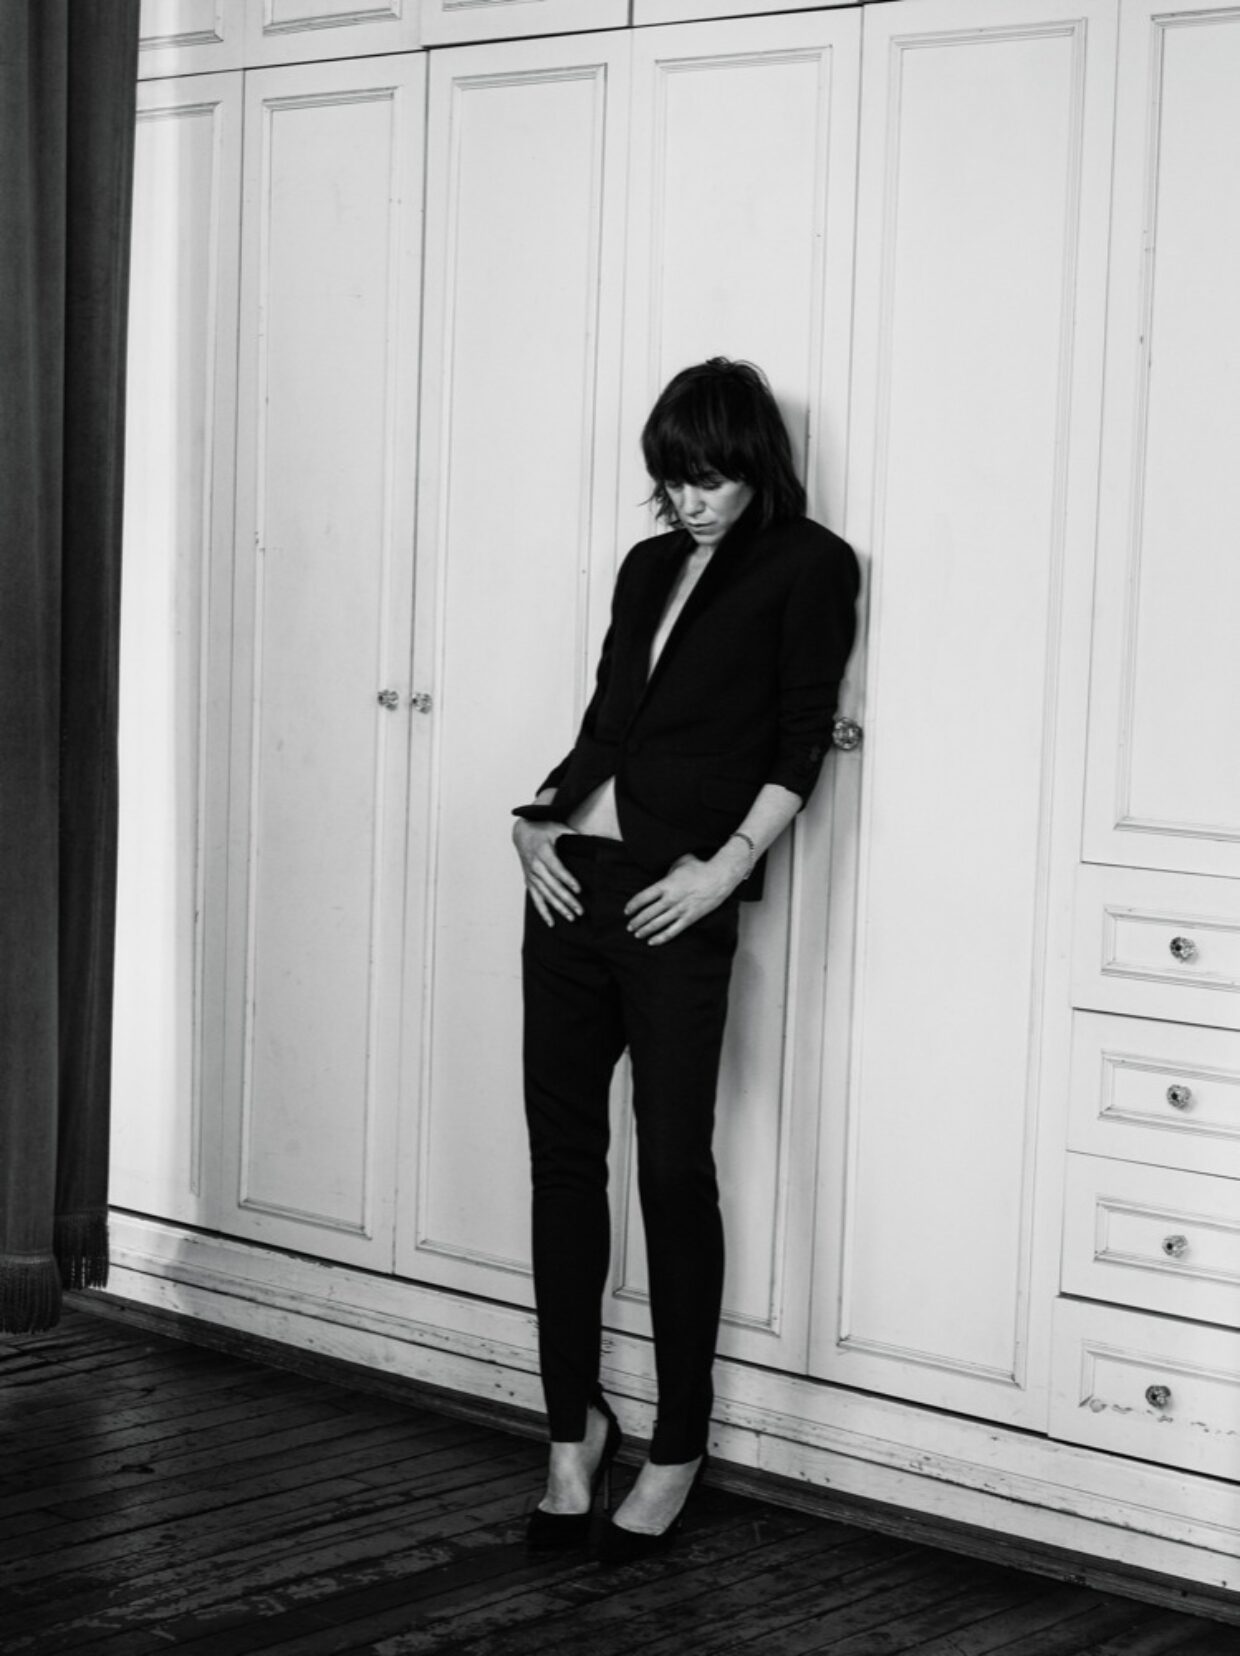 Charlotte Gainsbourg Covers Interview Magazine in the “Queens of Cool” Issue | 3